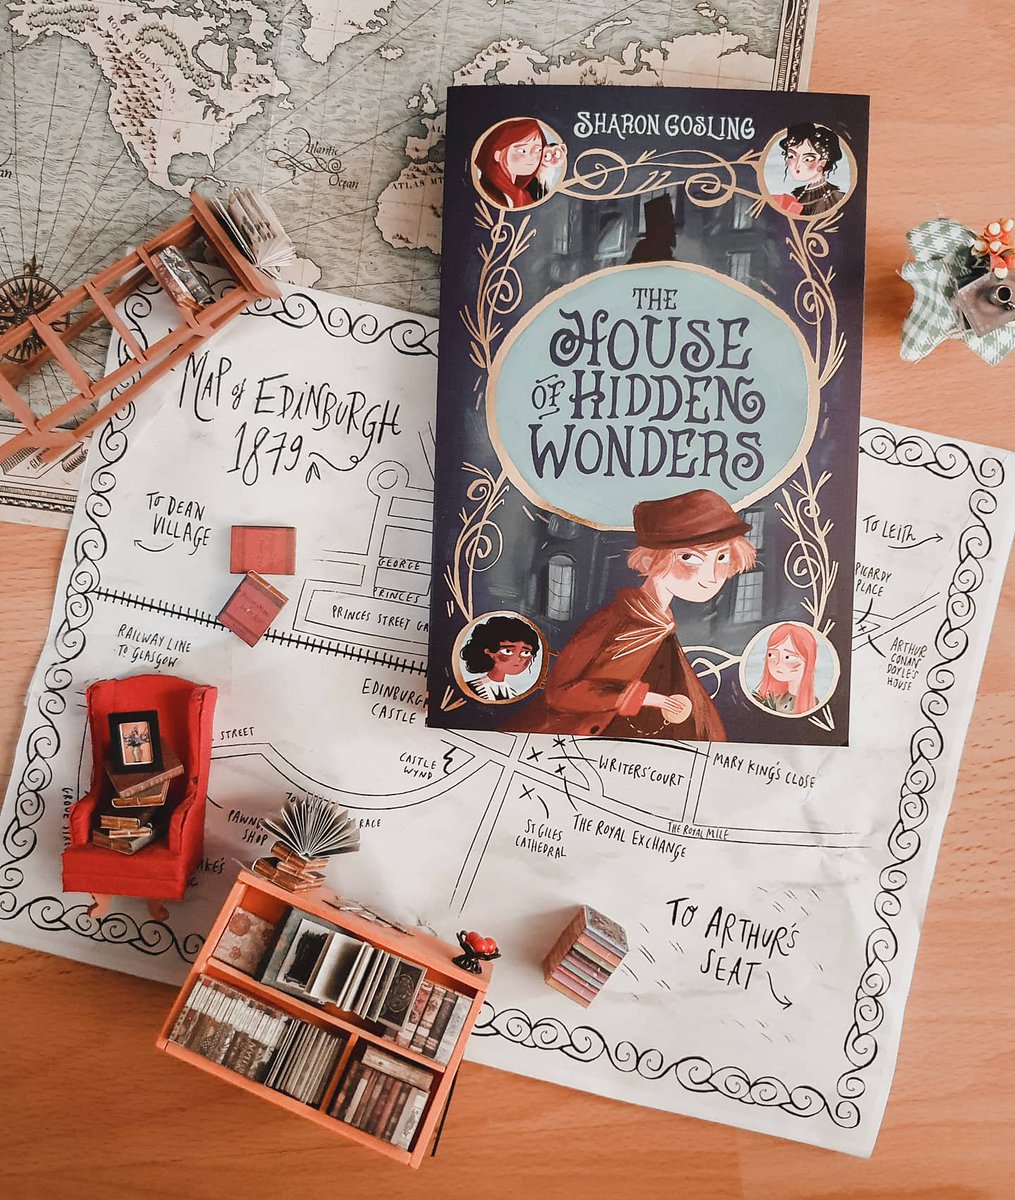 Happy Pub Day to #TheHouseofHiddenWonders by @sharongosling!!! 🎉 huge thanks to @LittleTigerUK for gifting me a copy! It's gorgeous. @hpillustration_ 😍